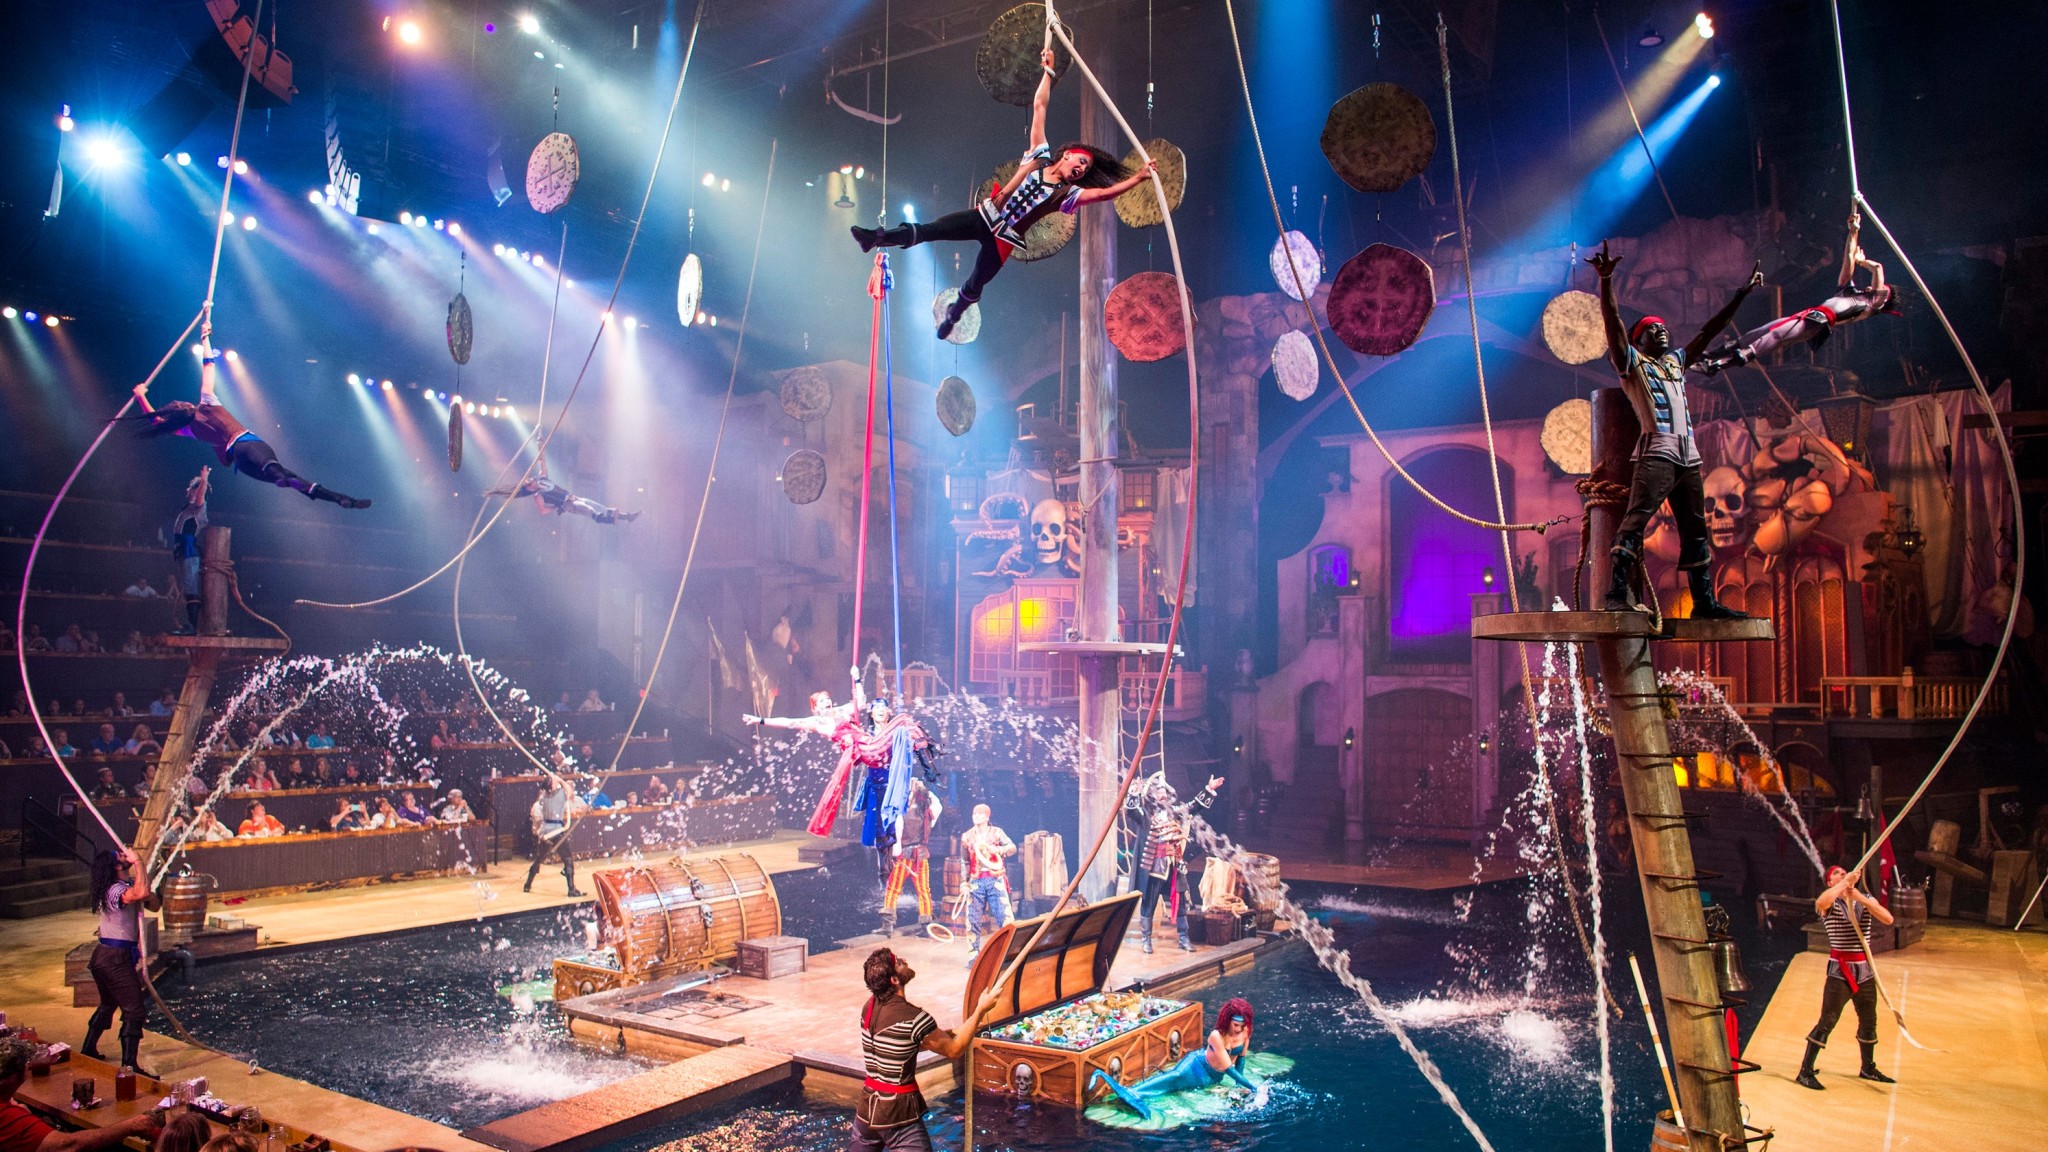 pirates voyage dinner and show reviews